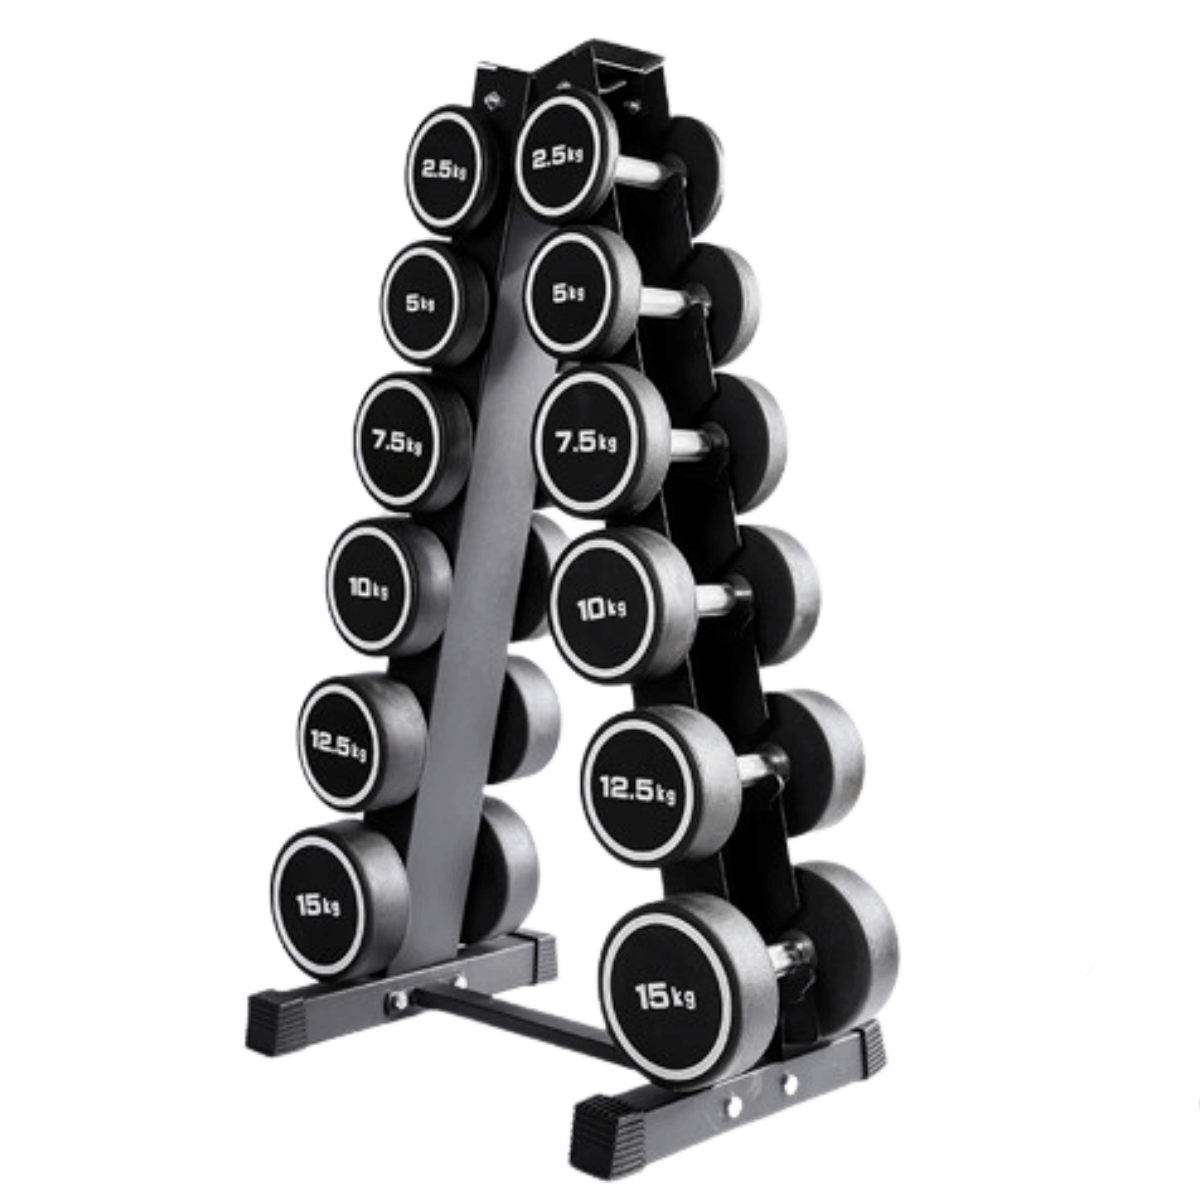 2.5KG to 15KG Round Dumbbell Set with Stand